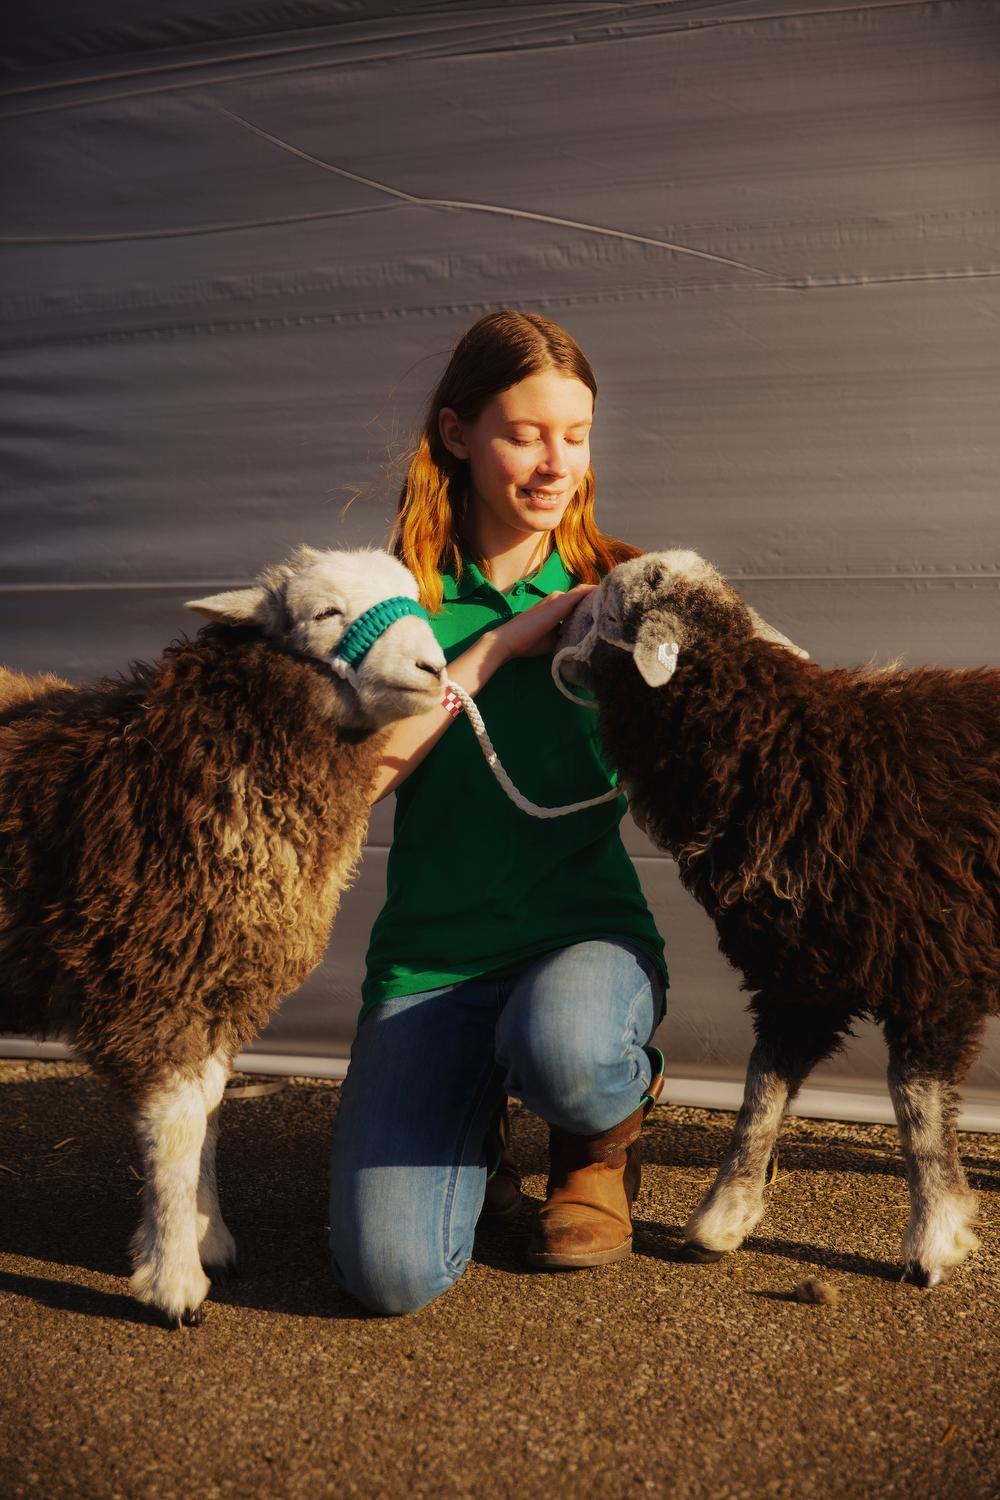 Sheep Wool Festival for NYT